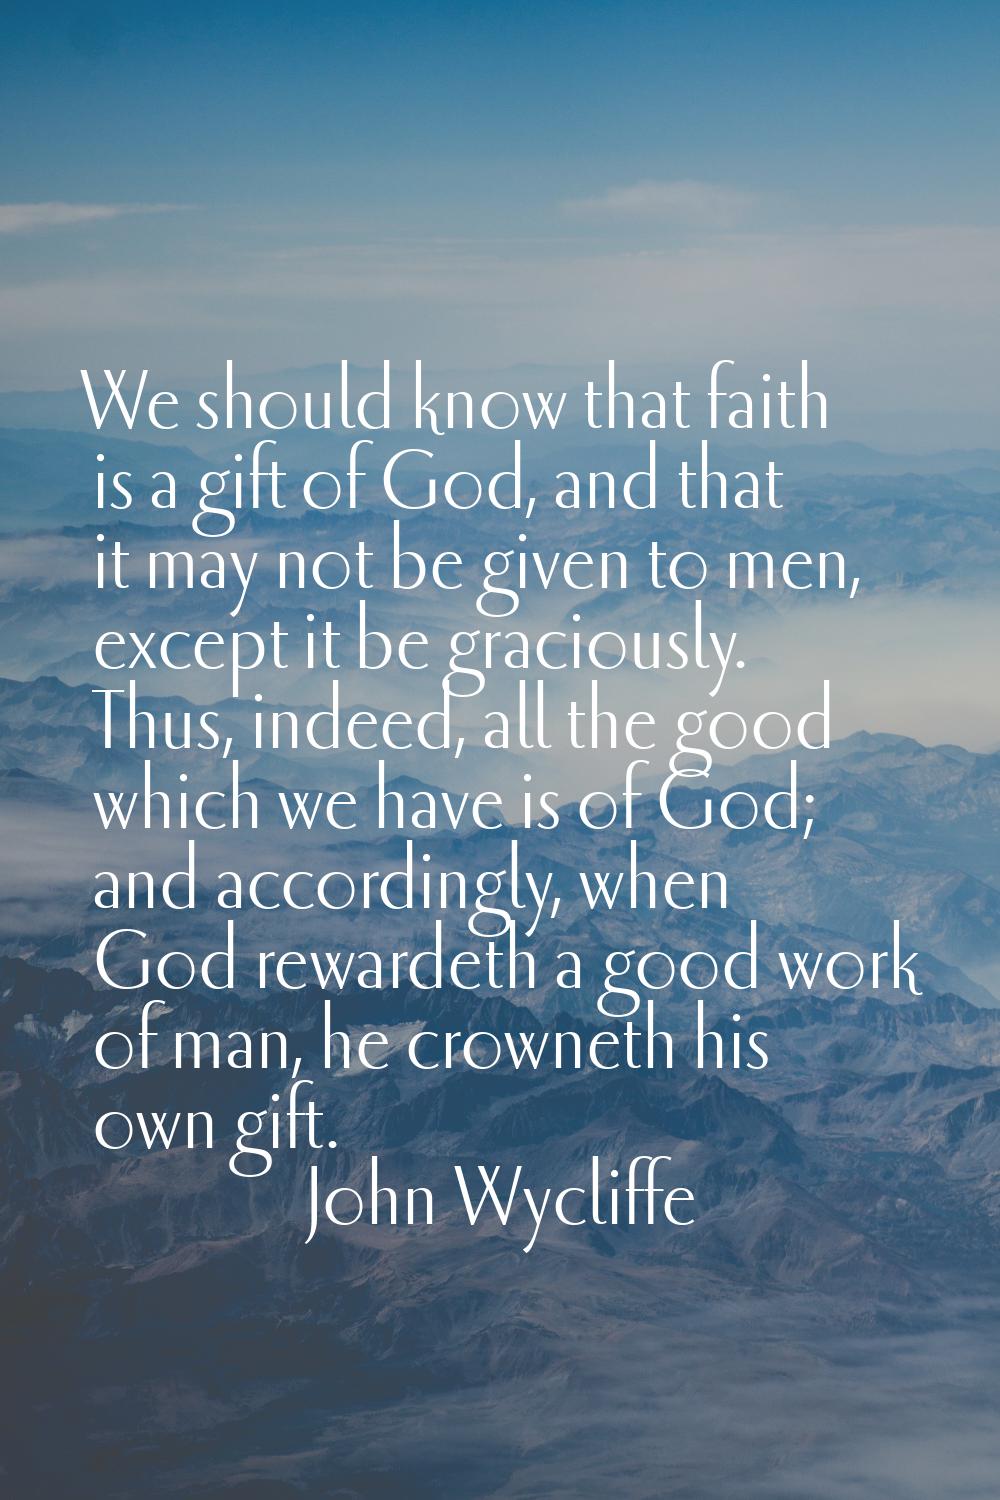 We should know that faith is a gift of God, and that it may not be given to men, except it be graci